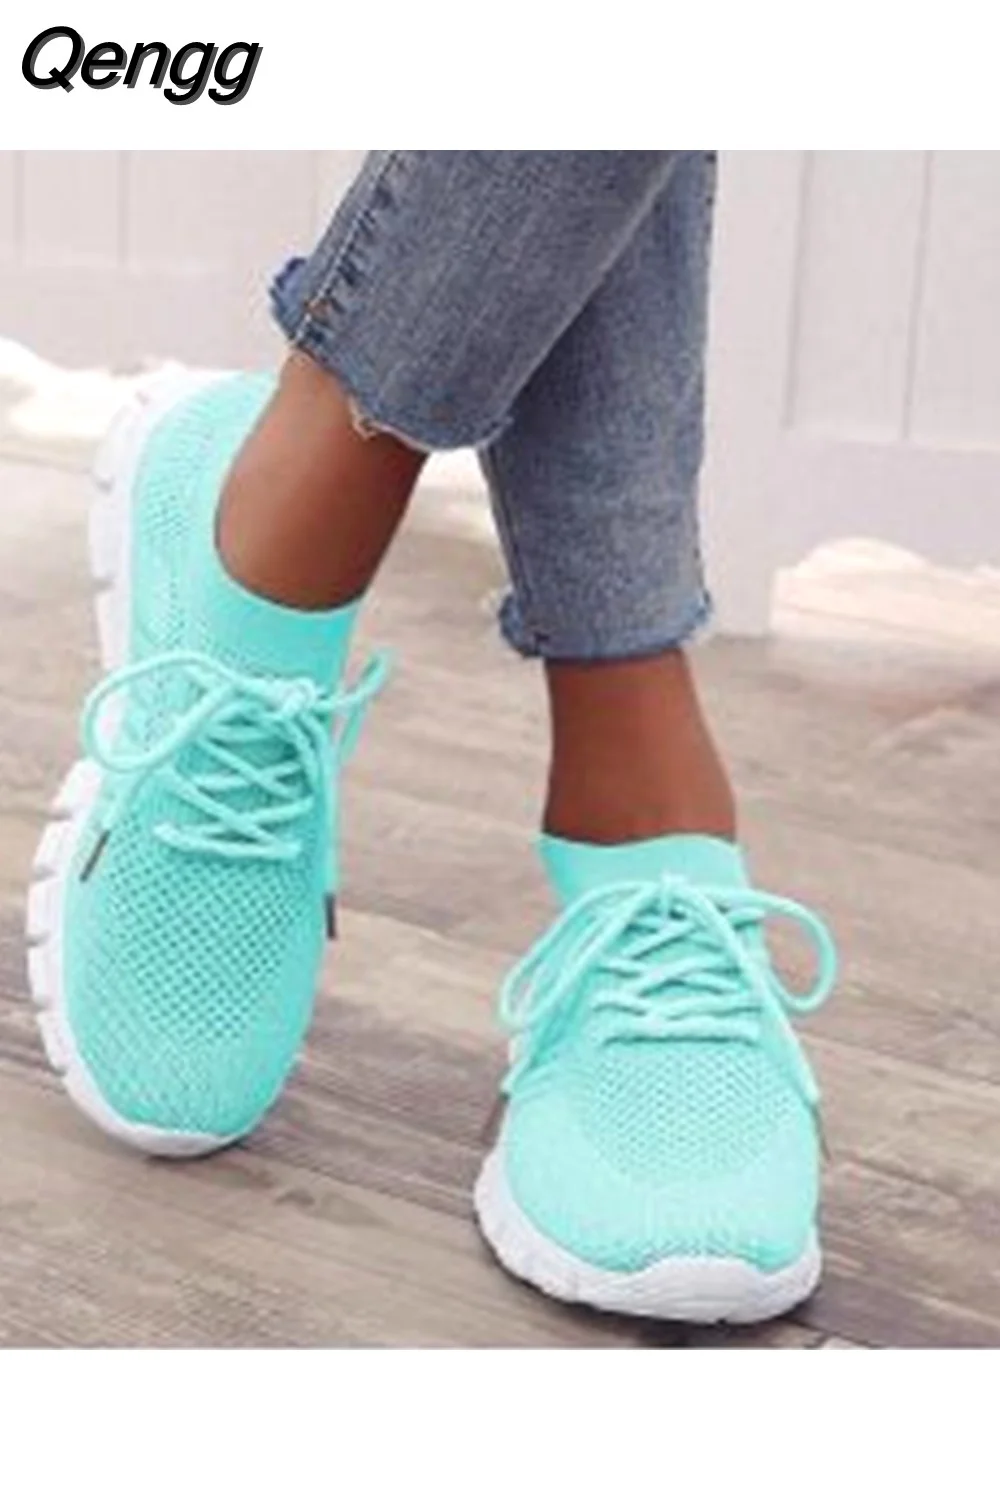 Qengg Shoes 2023 Summer Mesh Breathable Sneakers Women Platform Casual Sport Shoes Women Comfort Lace Up Running Shoes Plus Size 405-0